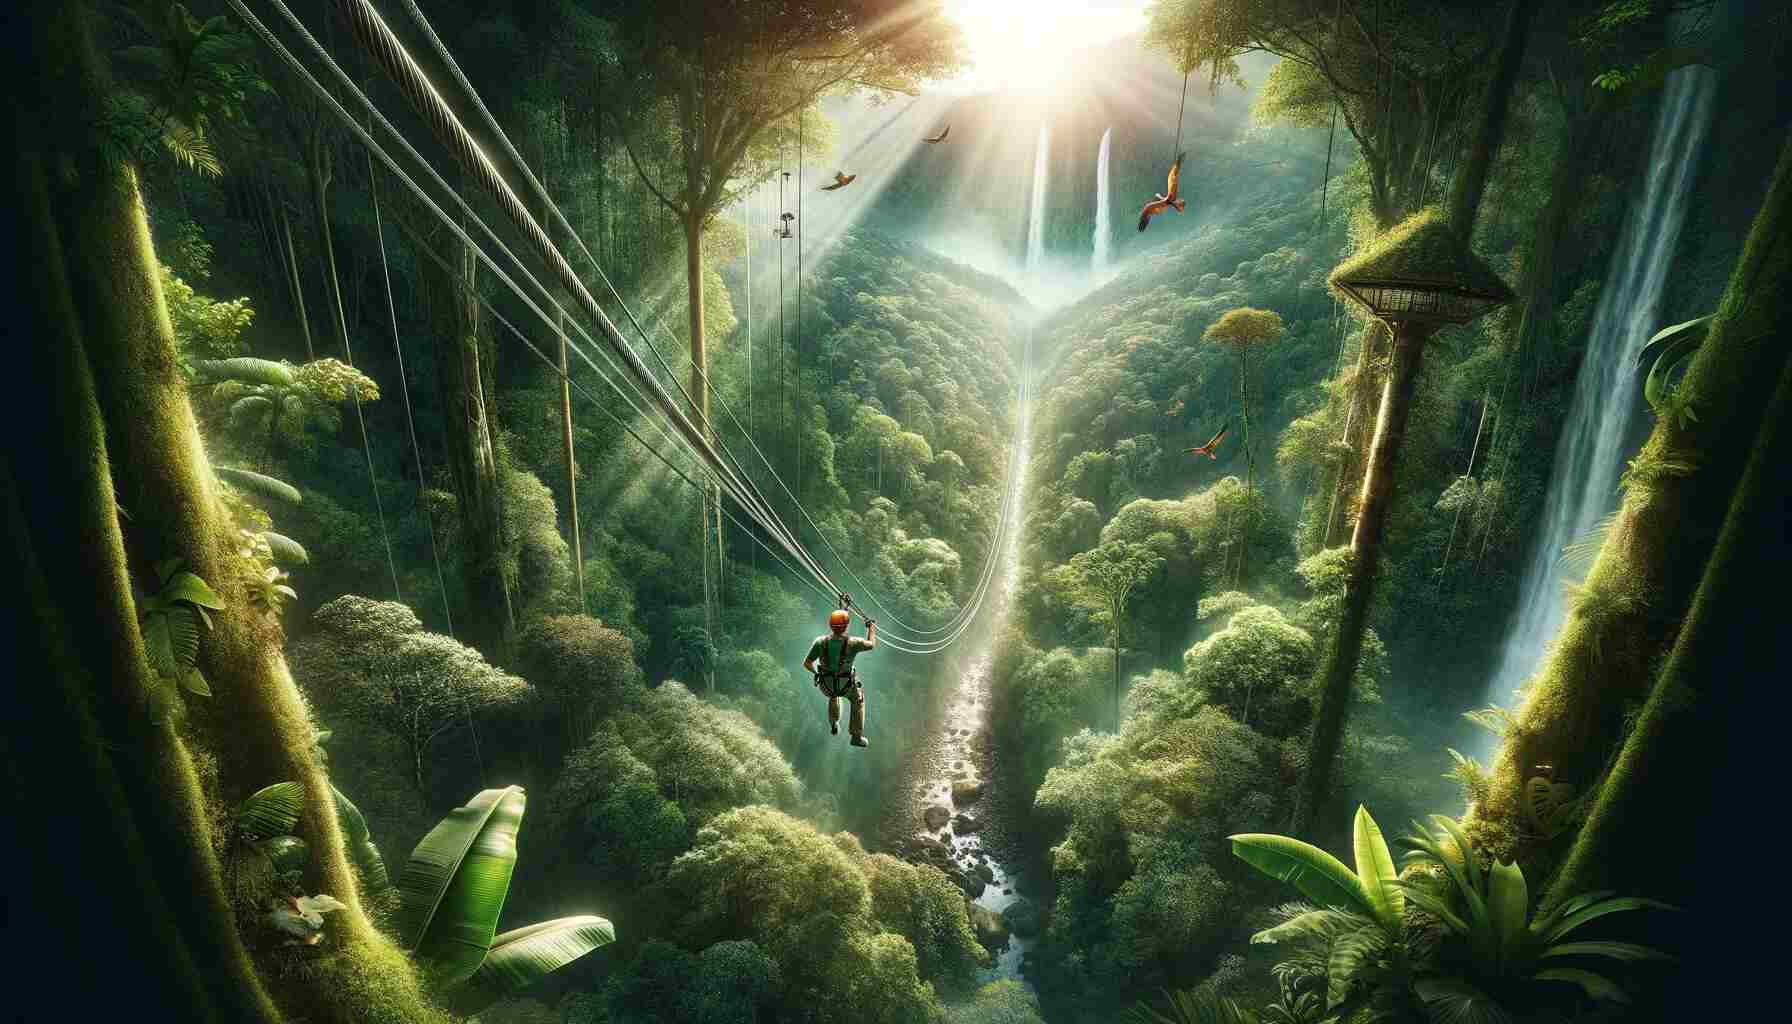 The author of this article ziplining over a lush rainforest canopy, with sunlight filtering through towering trees and a distant waterfall visible in the background. The scene is vibrant with tropical foliage, exotic birds, and a sense of exhilarating speed and height.